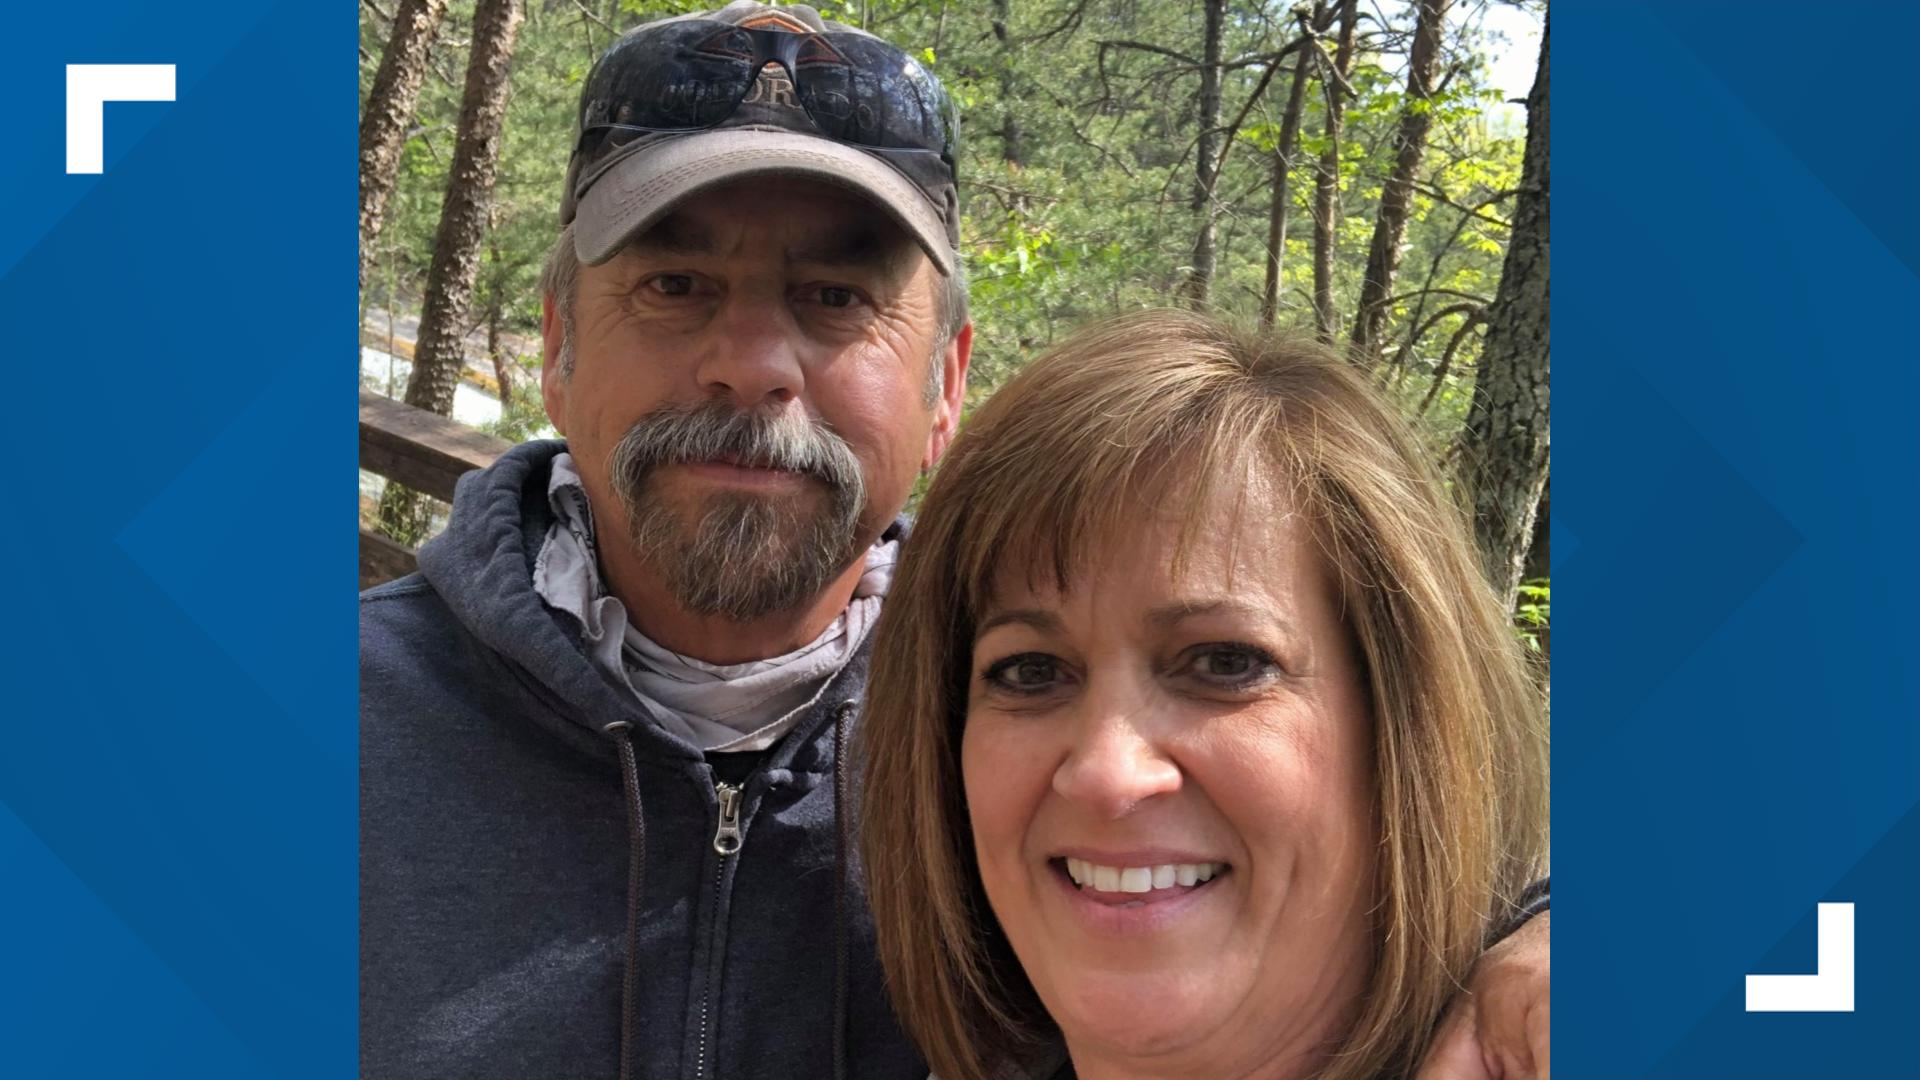 Detectives said Cynthia and Greg Gobble were married but separated. They went missing under "odd circumstances." Their bodies were found in a wooded area on Friday.